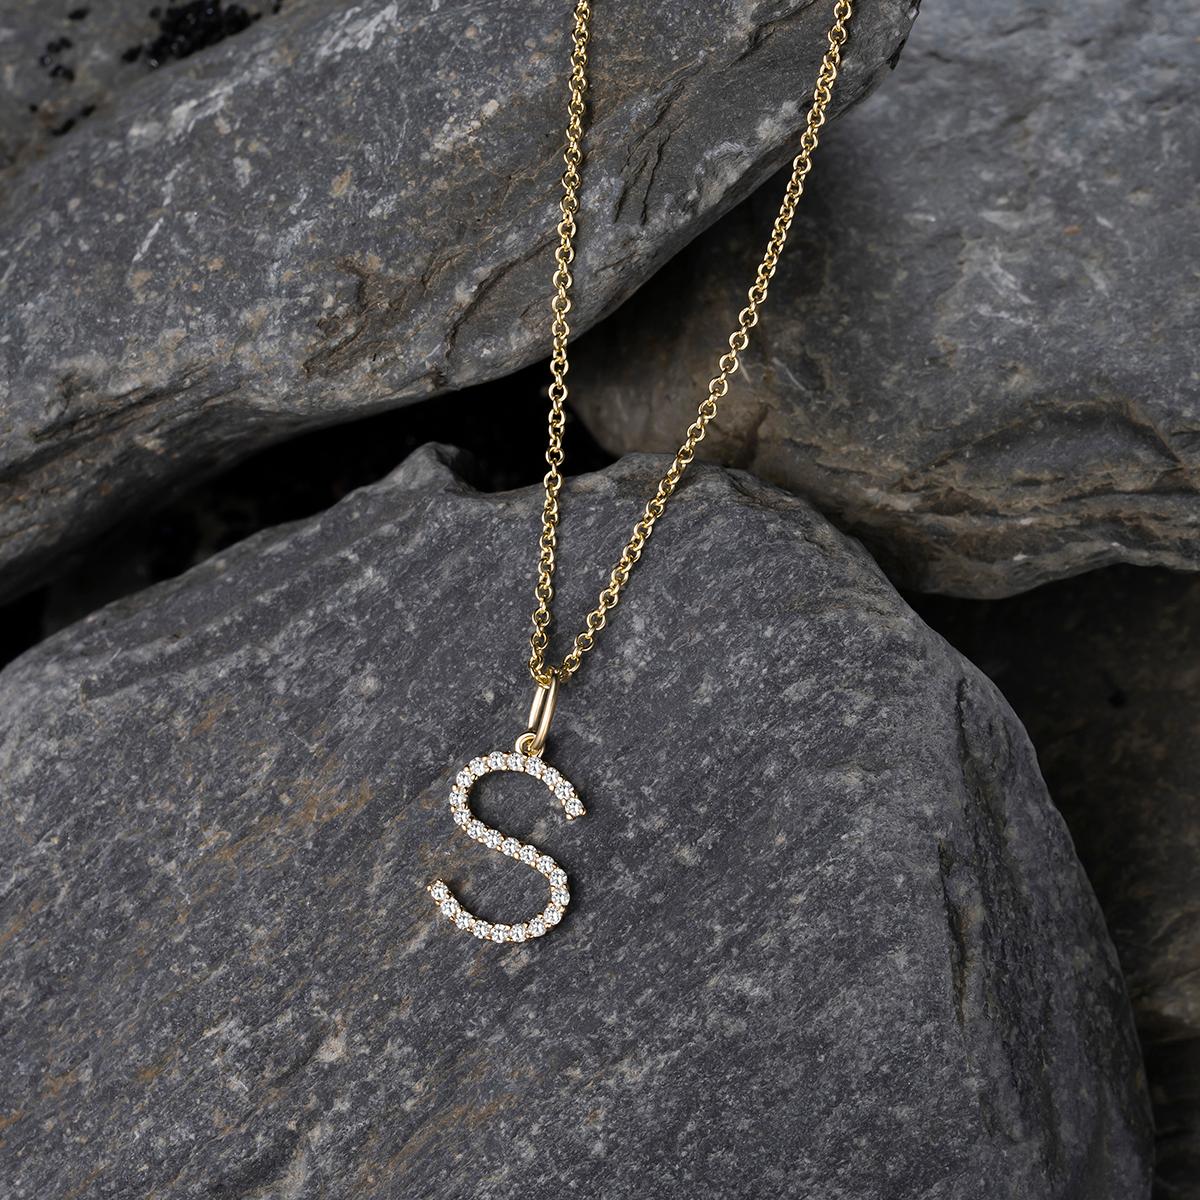 Necklace Information
Diamond Type : Natural Diamond
Metal : 14k Gold
Metal Color : Yellow Gold
Total Carat Weight : 0.15ct
Diamond Color-Clarity : G-SI
Diameter : 12.5mm

A necklace is a gift that embodies love, style, and beauty, sure to bring a